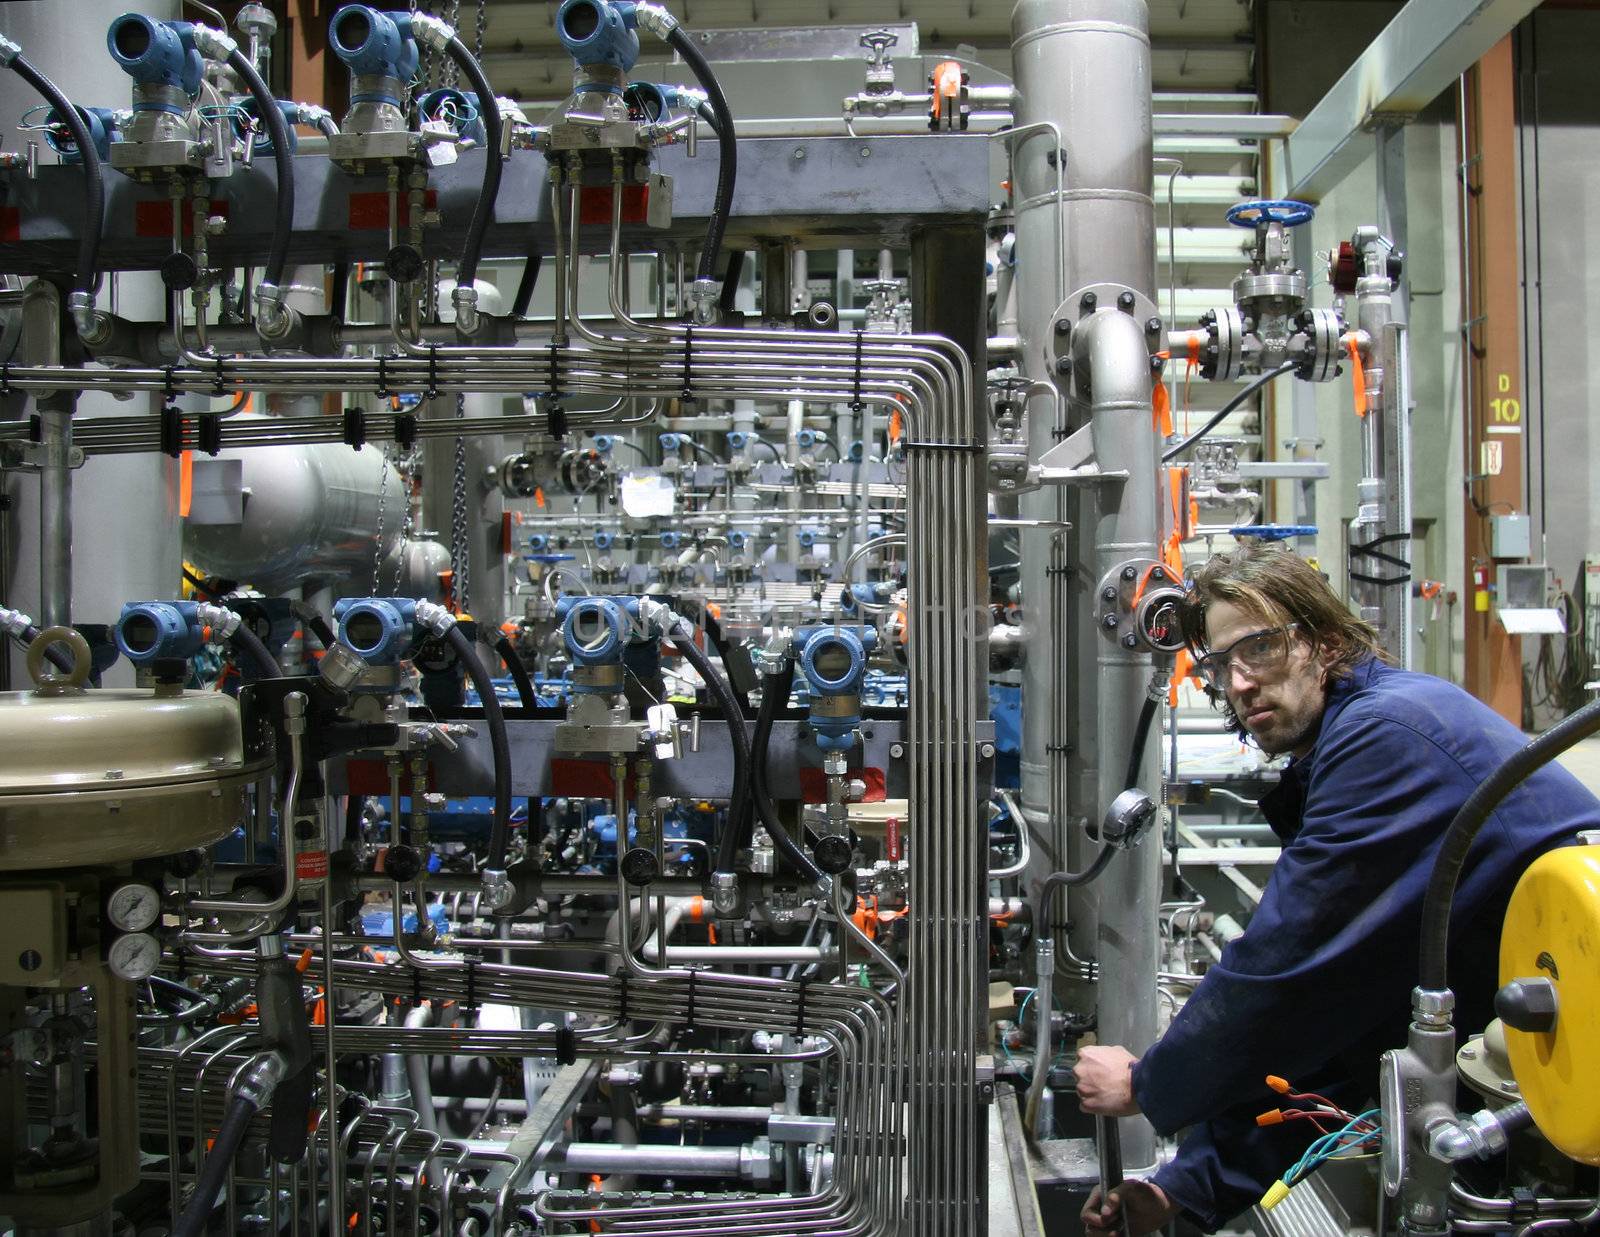 Technician working on a complex machinery